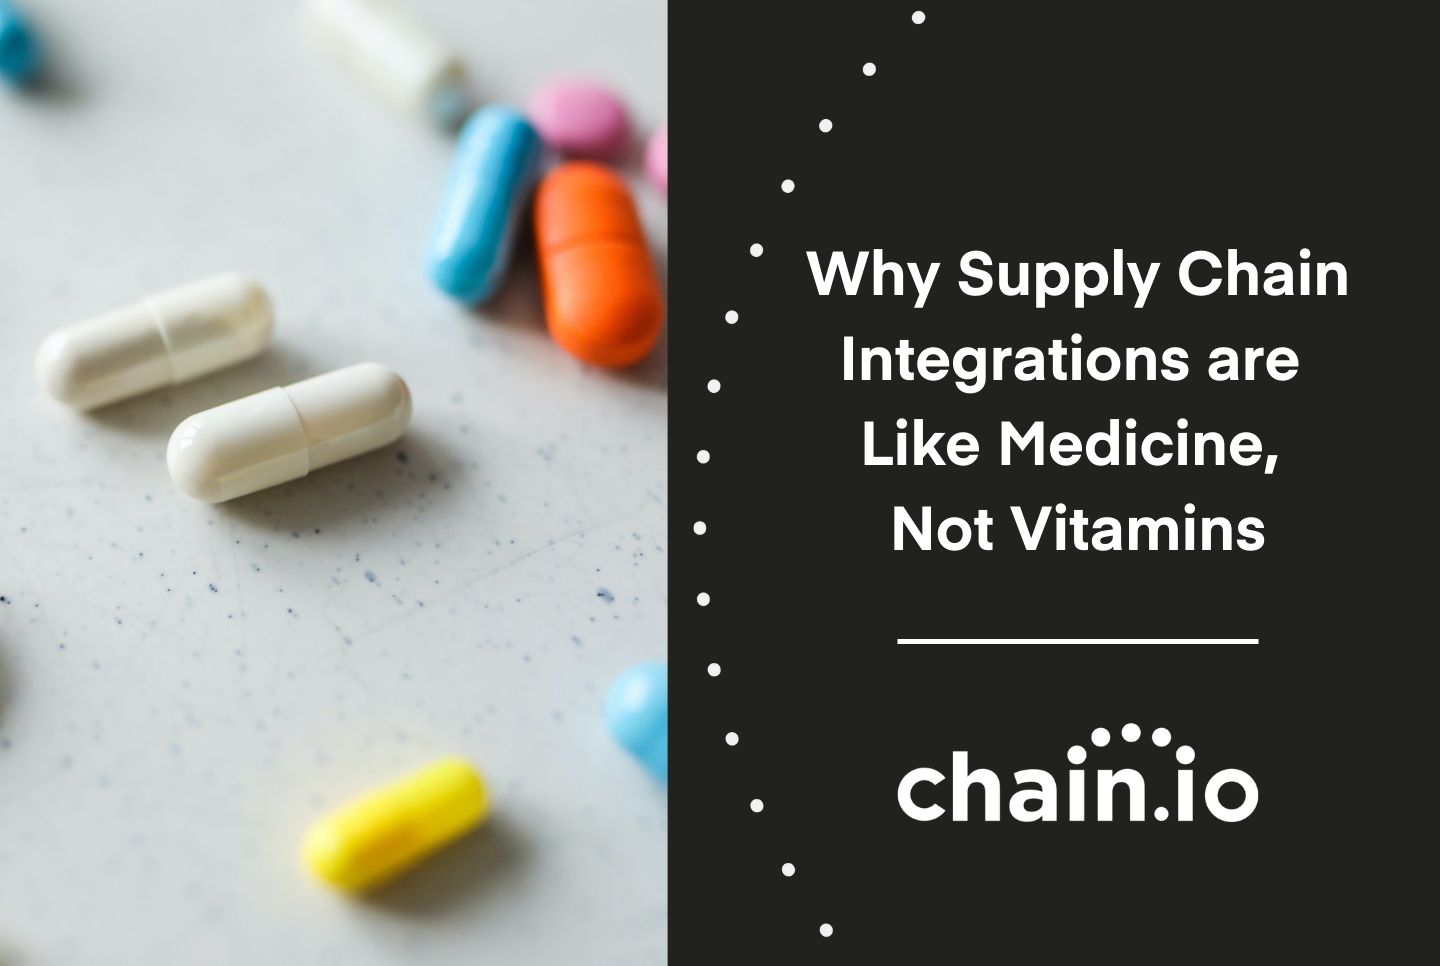 Supply chain integrations, back office integrations, supply chain visibility, creating agile and scalable supply chain and logistics practices